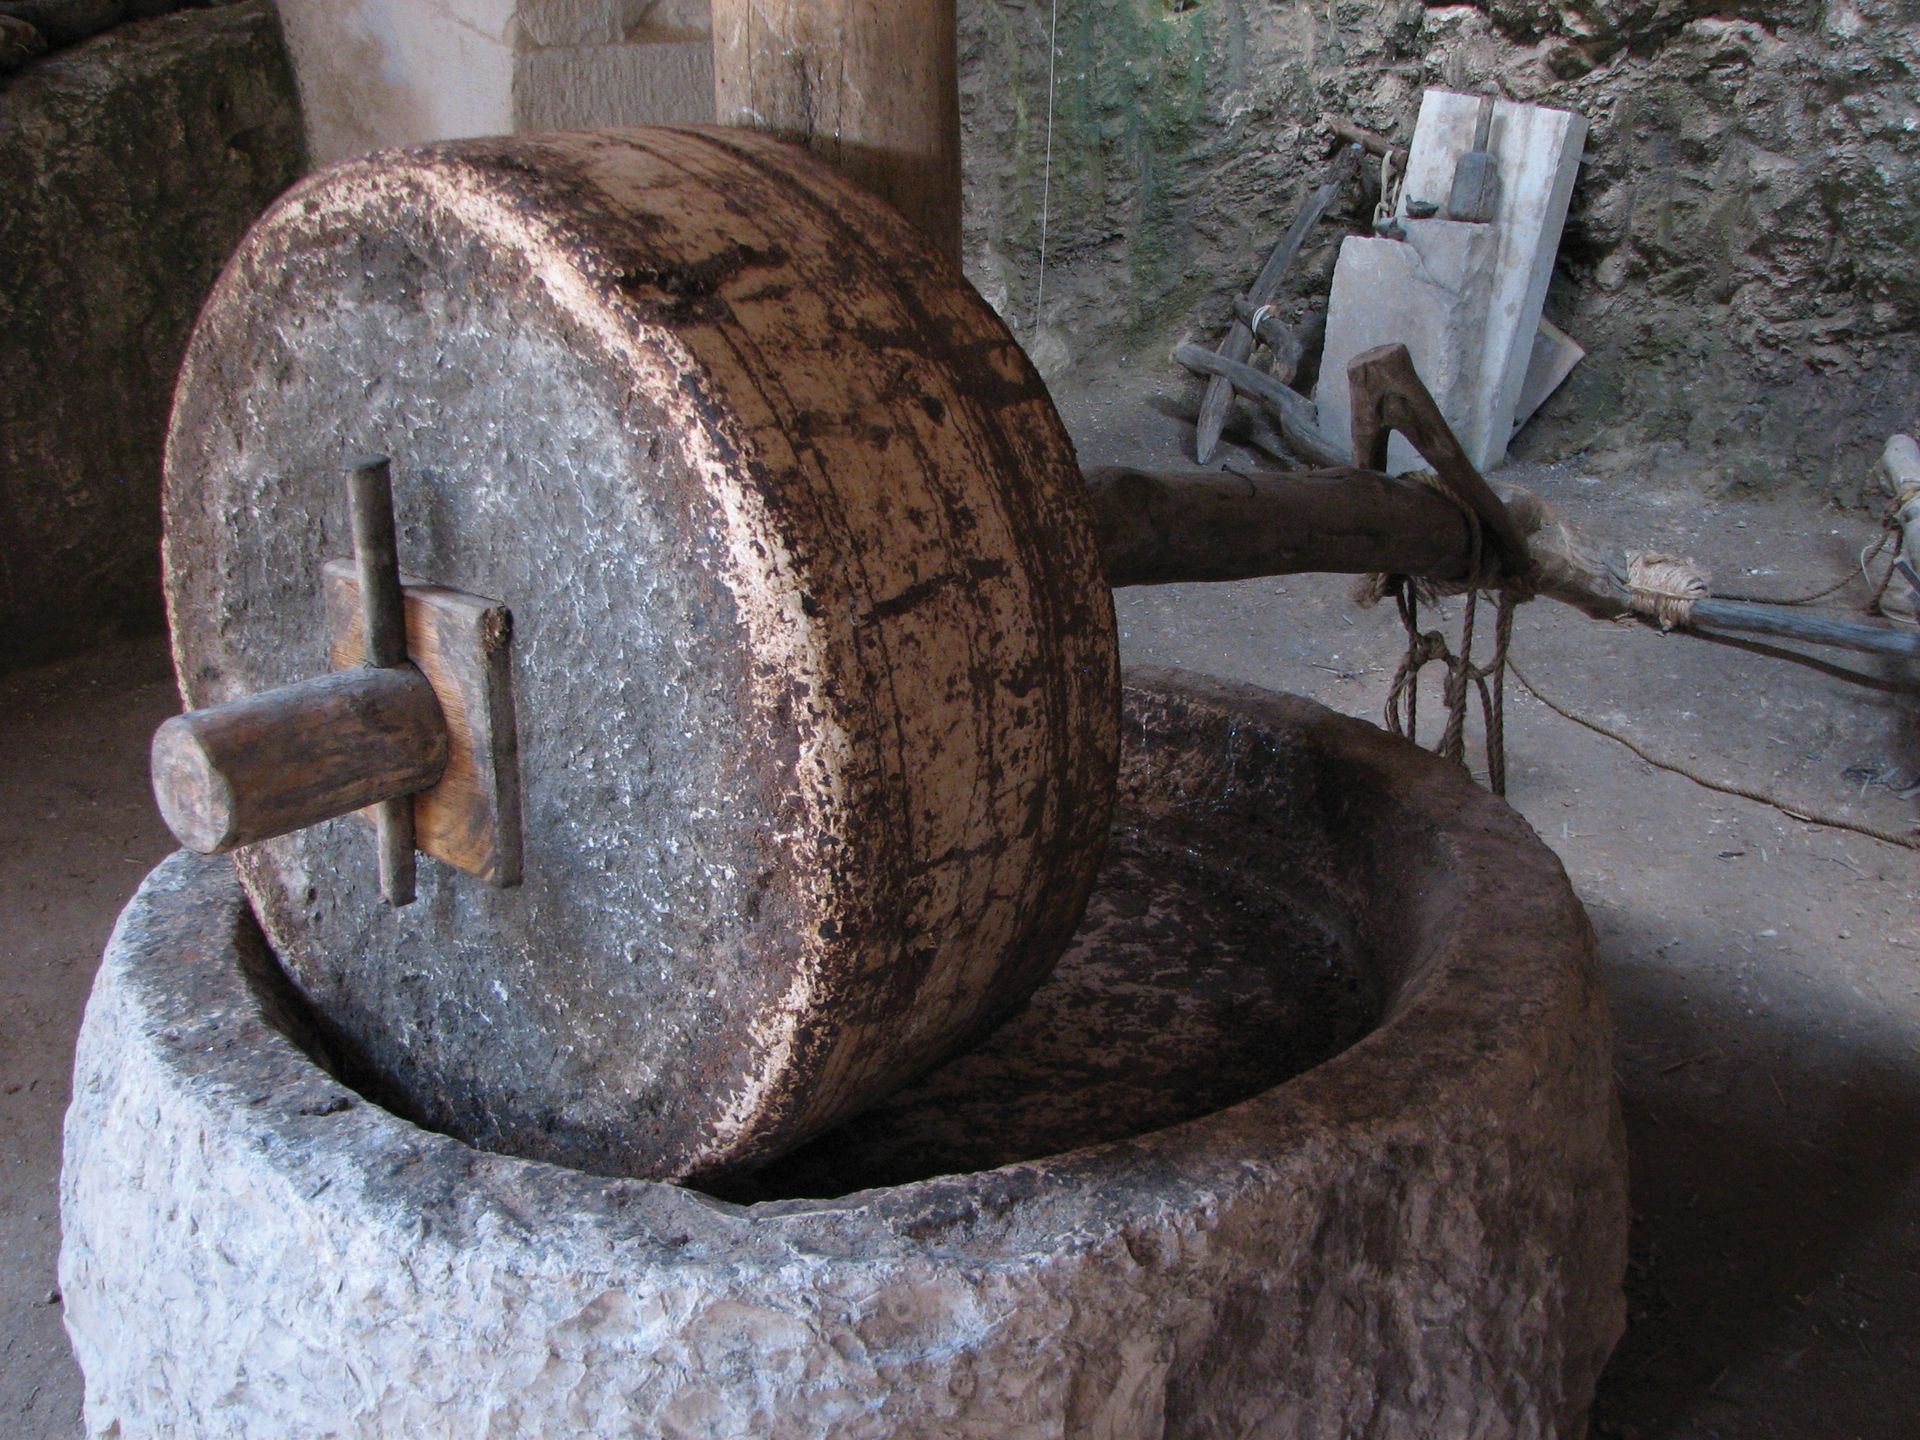 A round millstone made from solid rock.